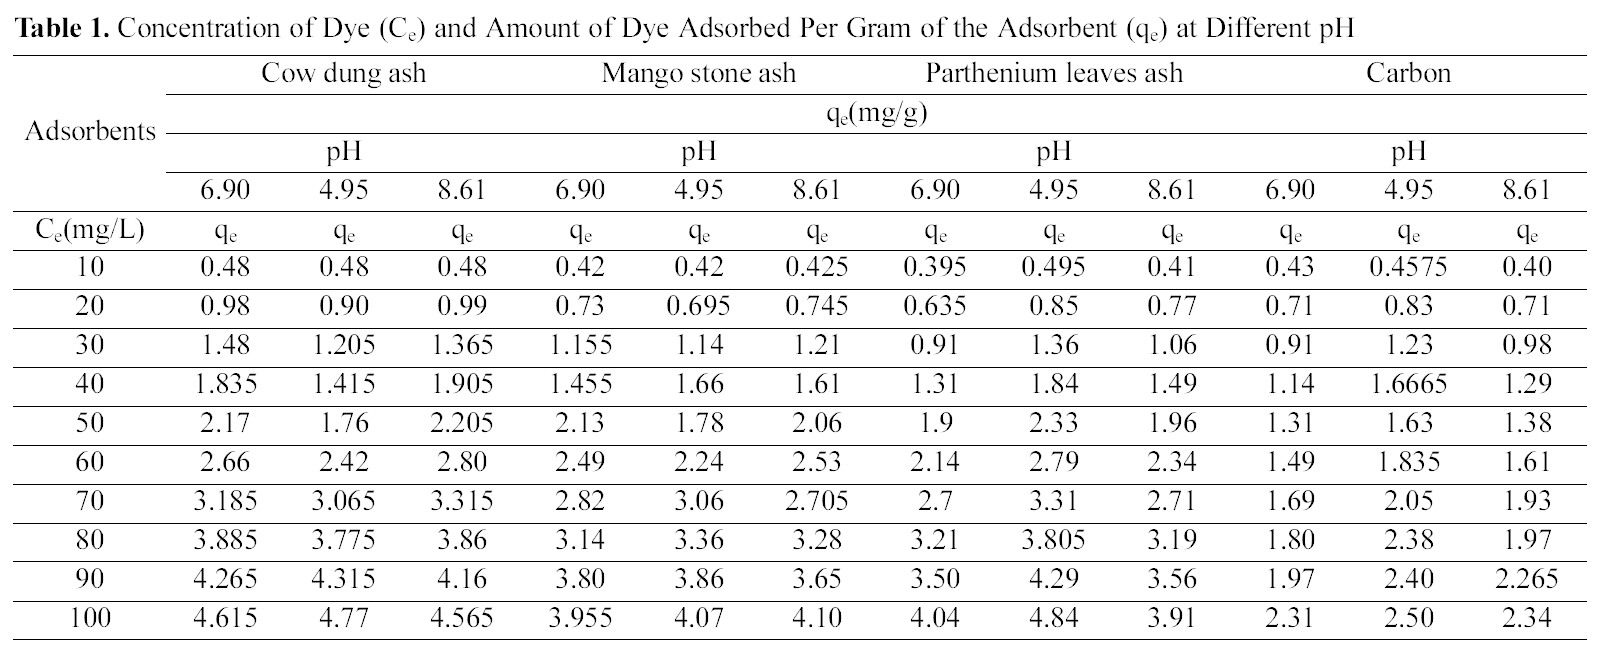 Concentration of Dye (Ce) and Amount of Dye Adsorbed Per Gram of the Adsorbent (qe) at Different pH